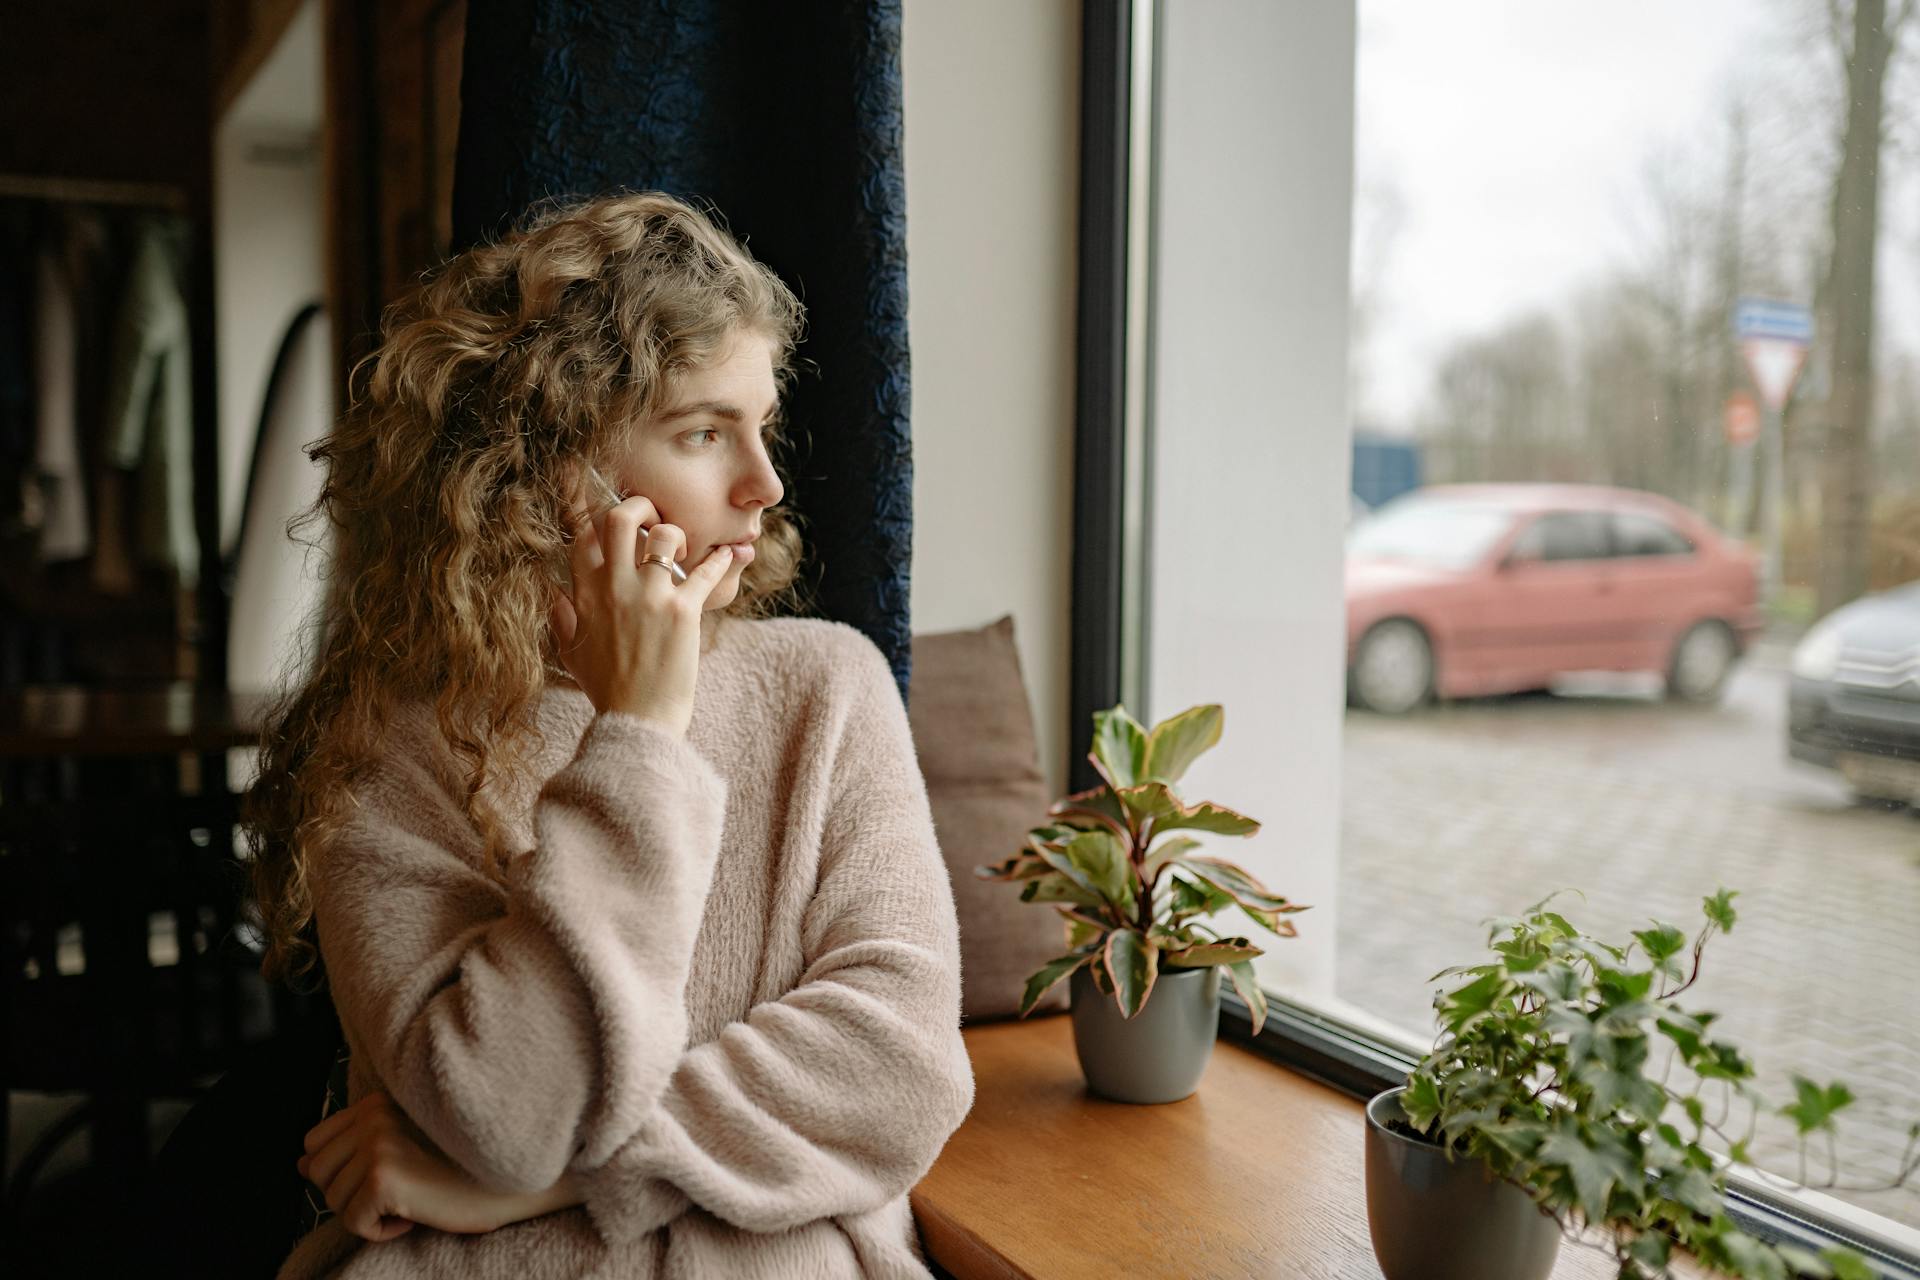 A woman talking on the phone while looking through the window | Source: Pexels